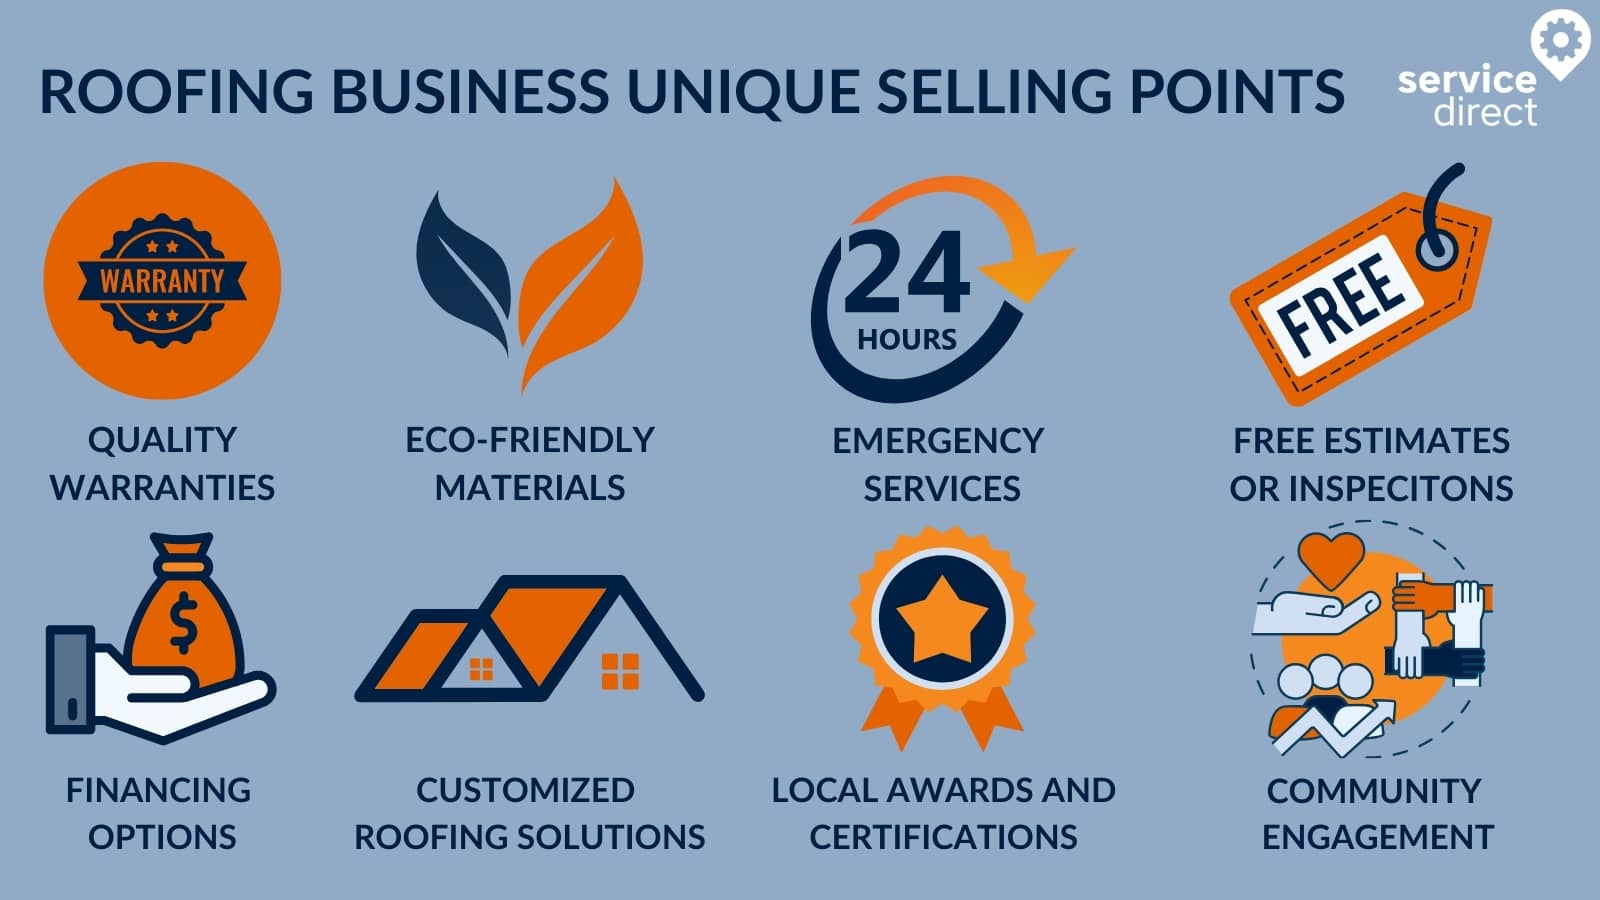 Examples of Unique Selling Points for Roofing Business